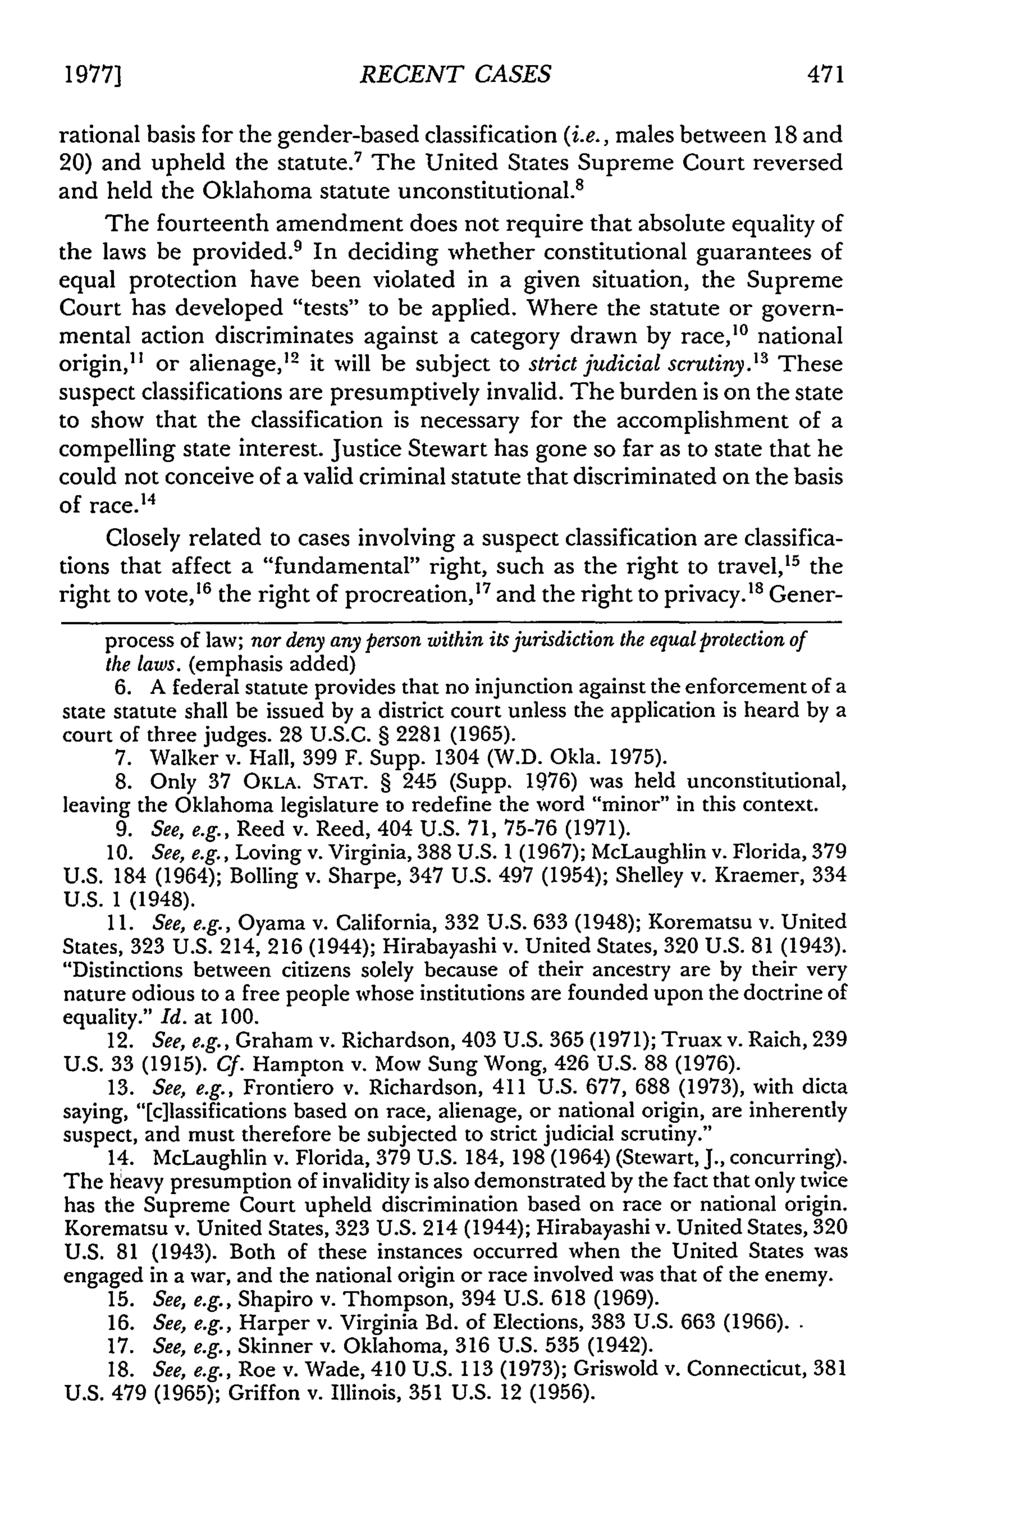 1977] Missouri Law Review, Vol. 42, Iss. 3 [1977], Art. 9 RECENT CASES rational basis for the gender-based classification (i.e., males between 18 and 20) and upheld the statute.